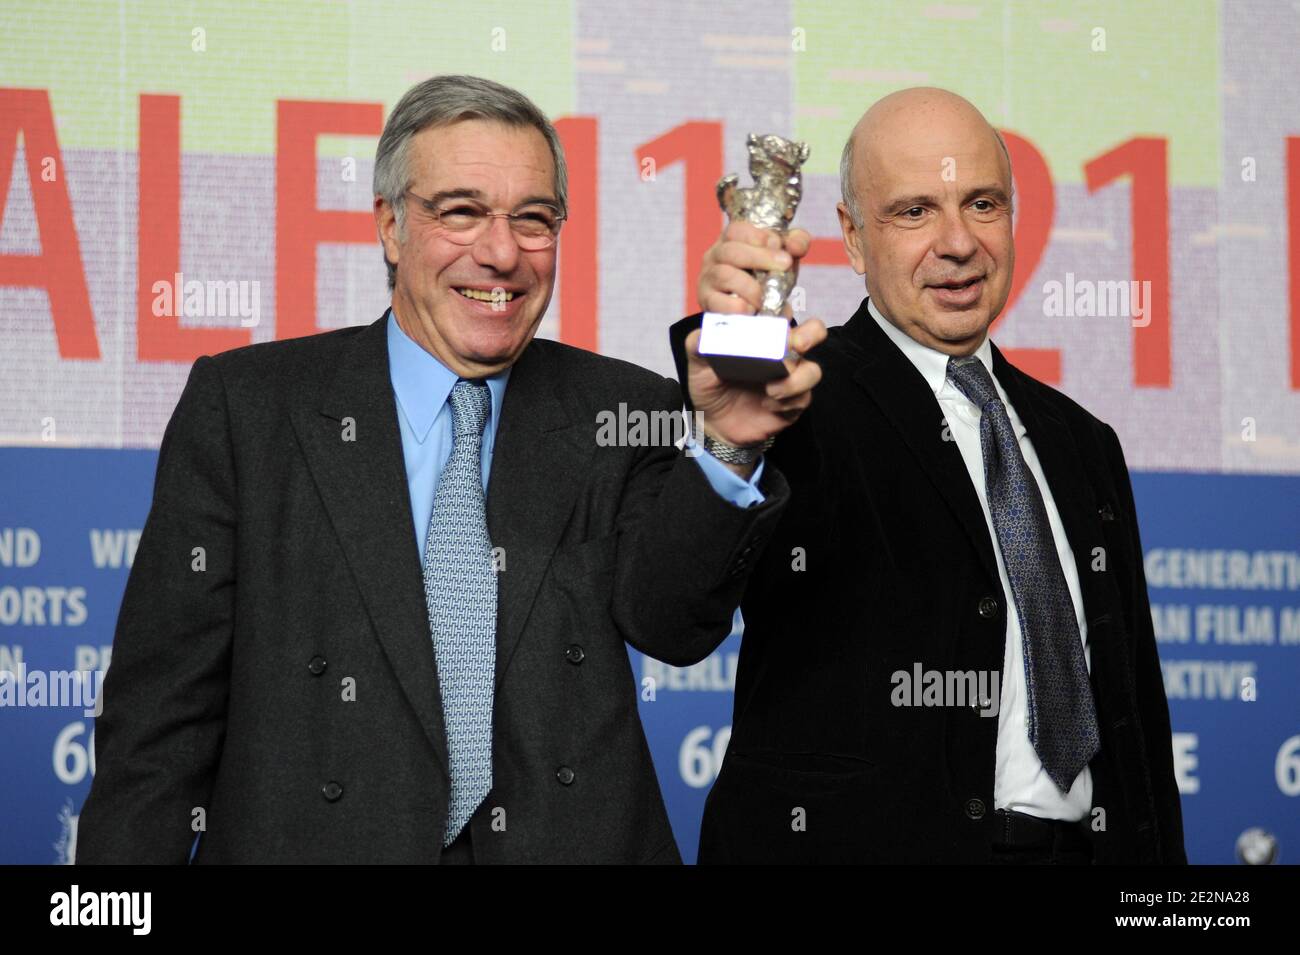 French producer Alain Sarde and Robert Benmussa pose with the Silver ...